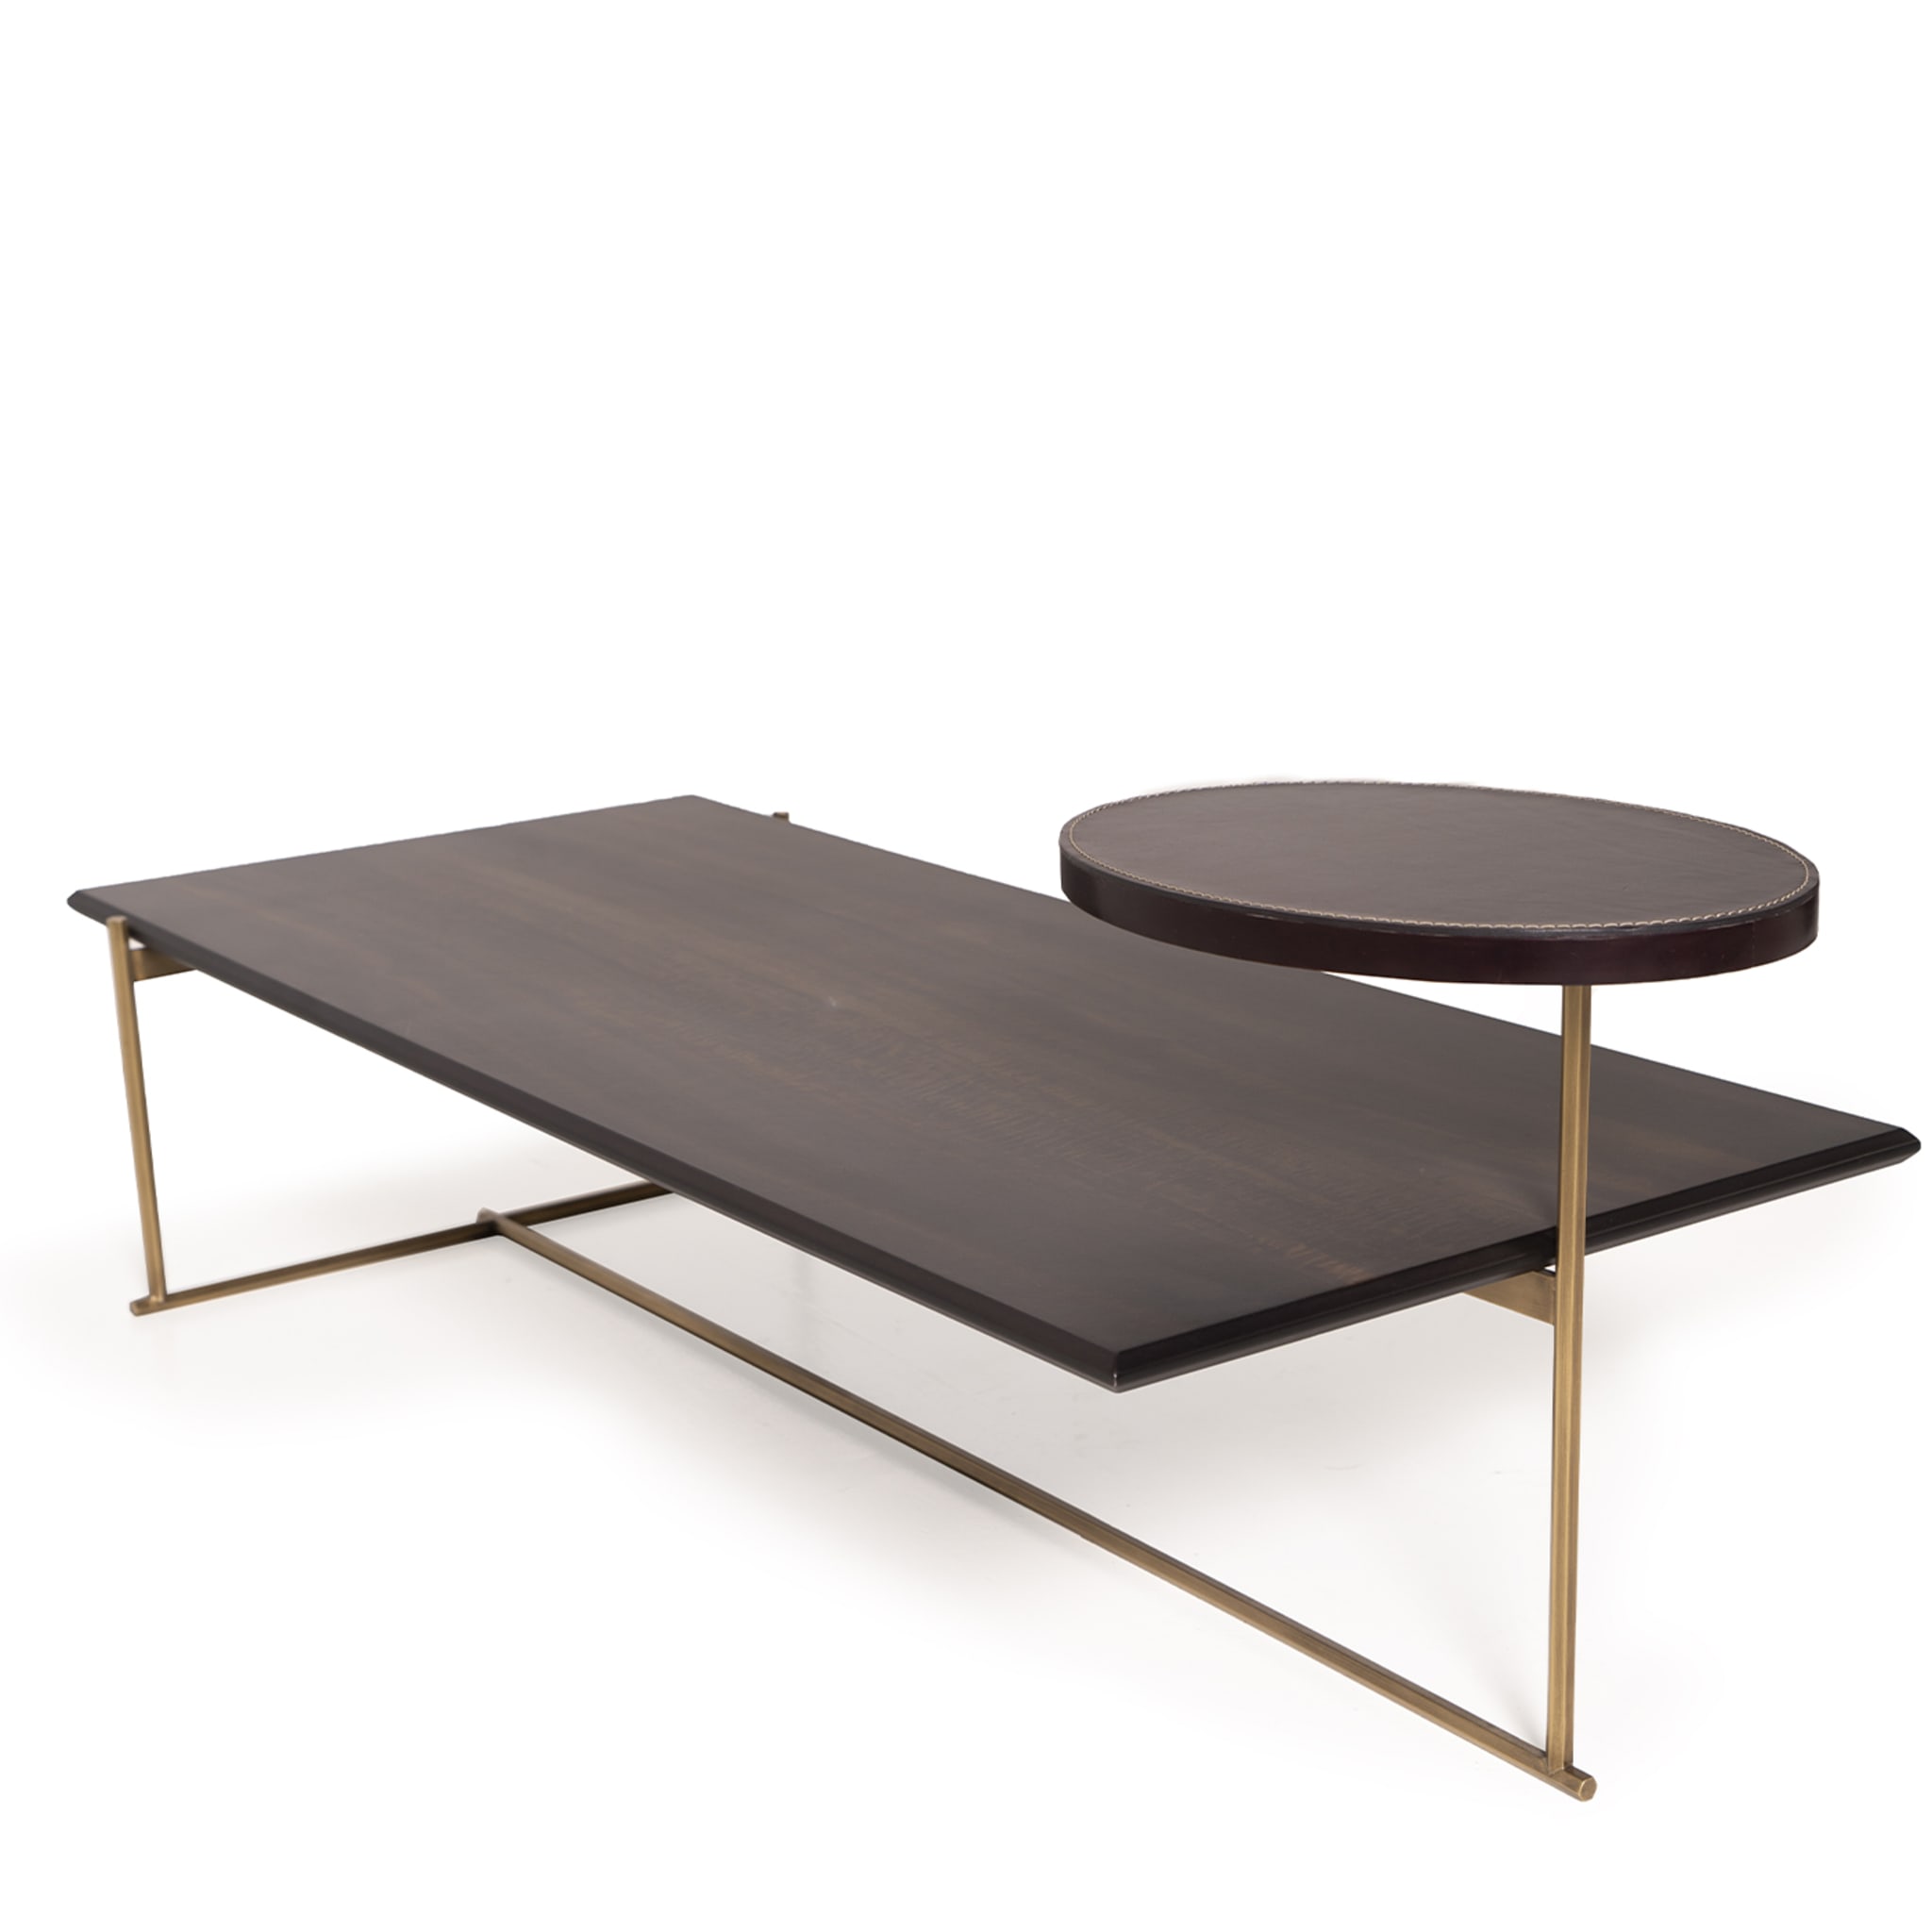 Skyline Coffee Table by Marco and Giulio Mantellassi - Alternative view 3